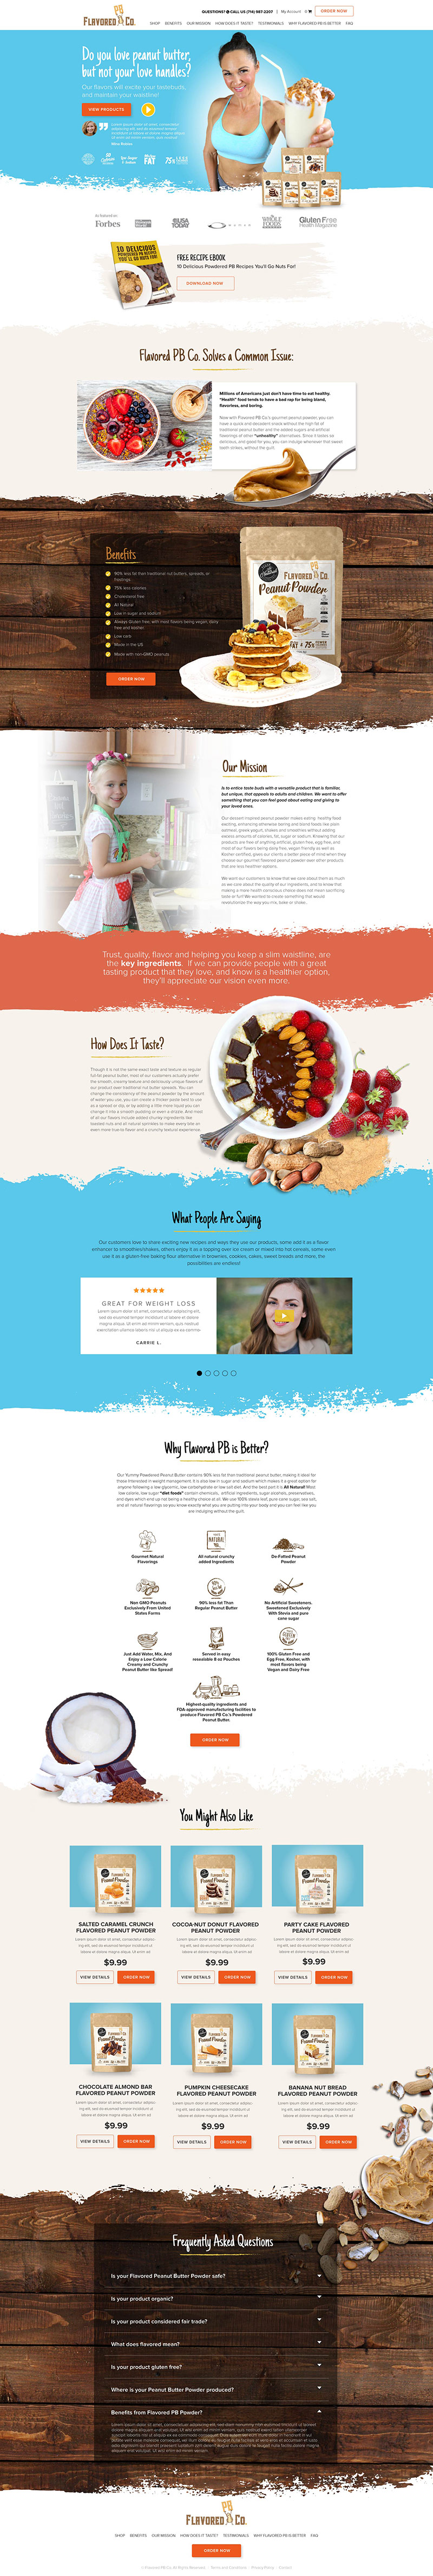 FLAVORED-PEANUT-BUTTER-HOME-PAGE-2